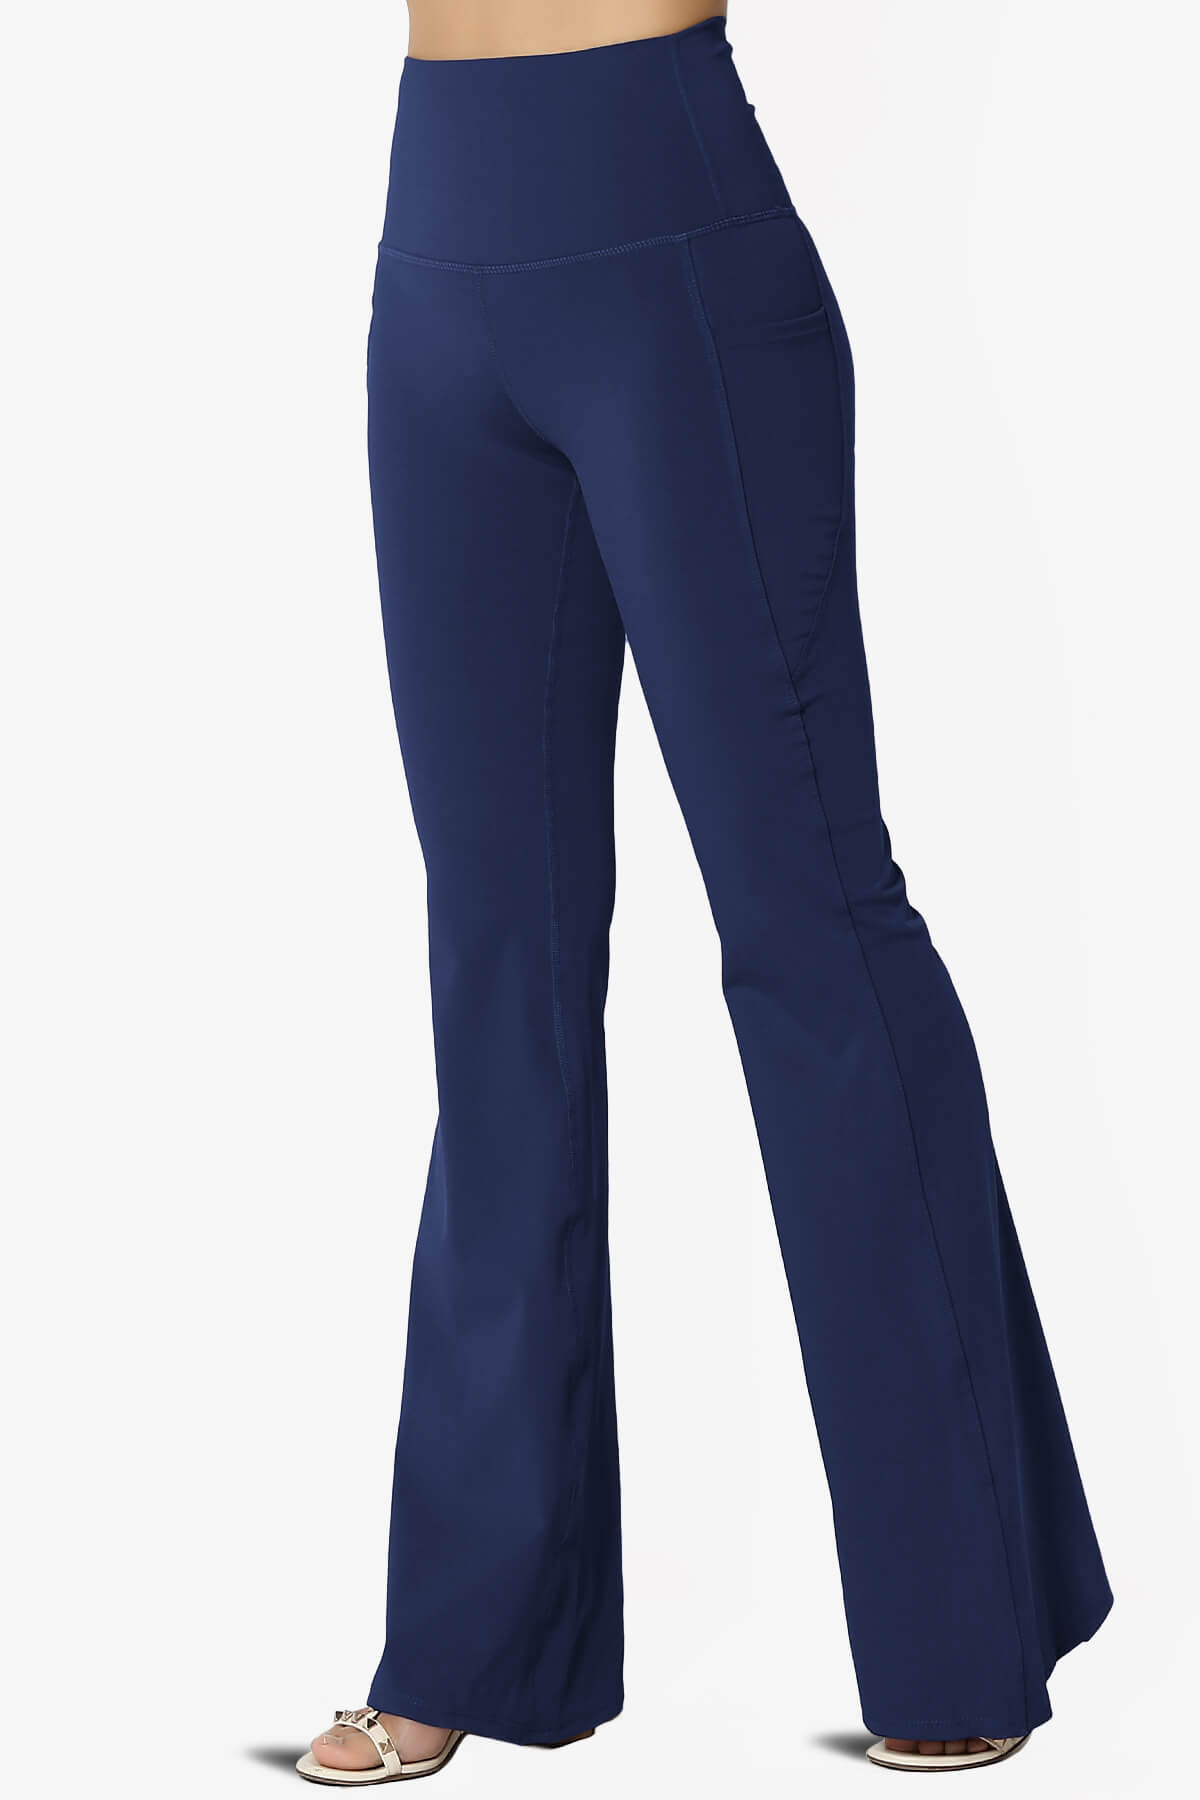 Load image into Gallery viewer, Gemma Athletic Pocket Flare Yoga Pants LIGHT NAVY_3
